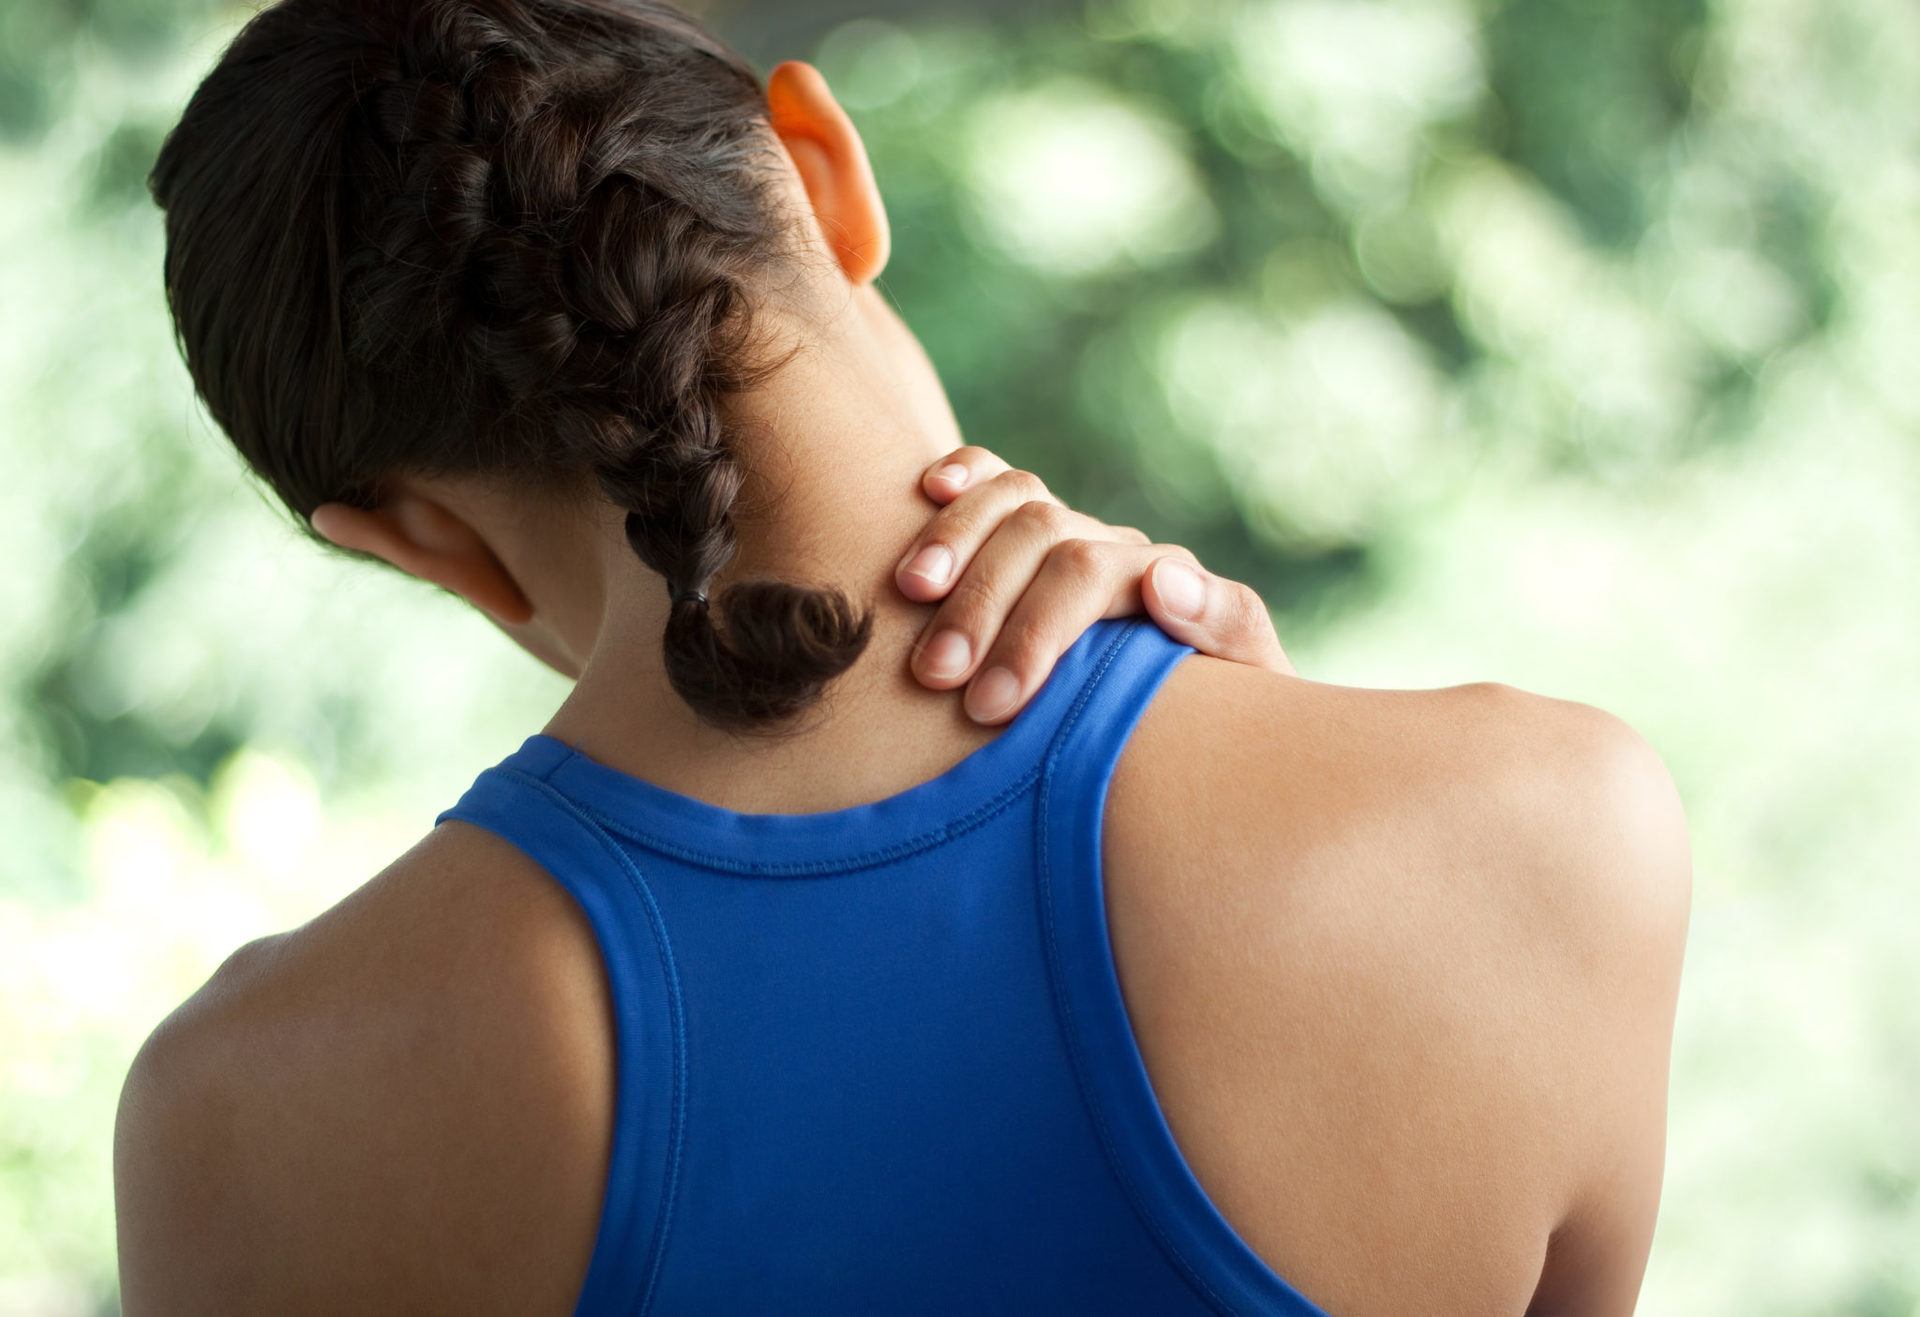 Smart Fitness: Protect Your Neck